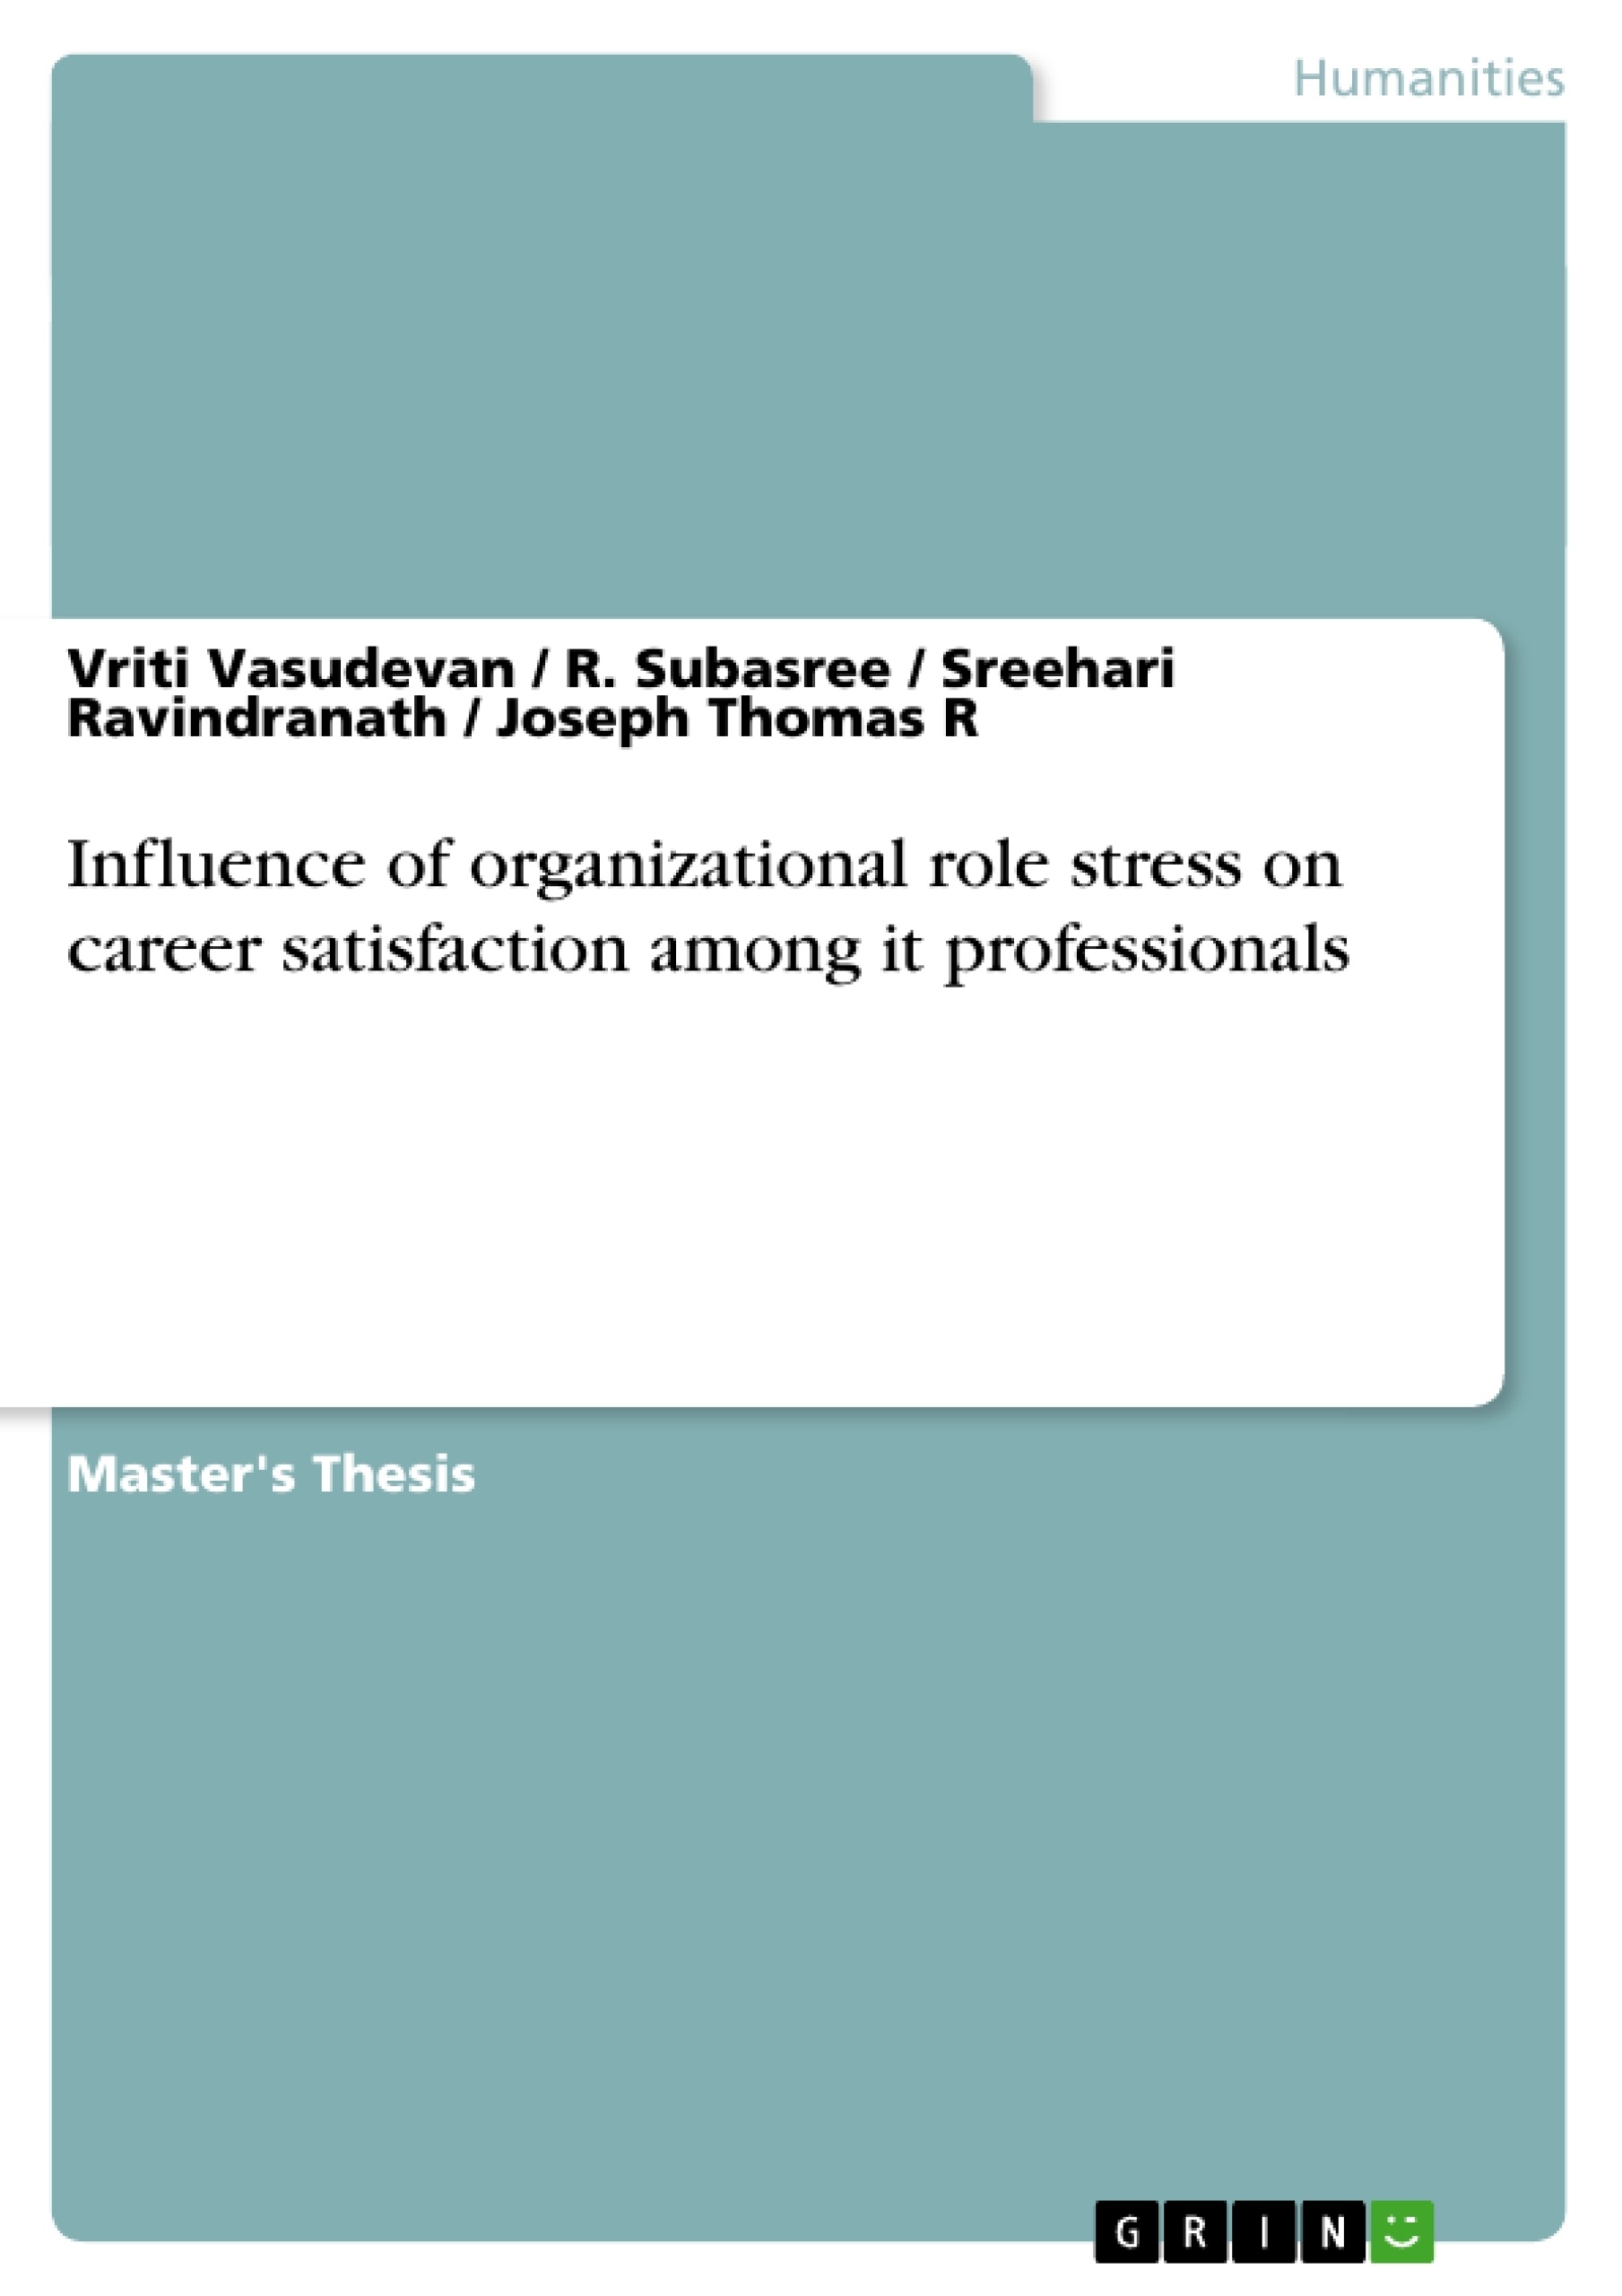 Title: Influence of organizational role stress on career satisfaction among it professionals